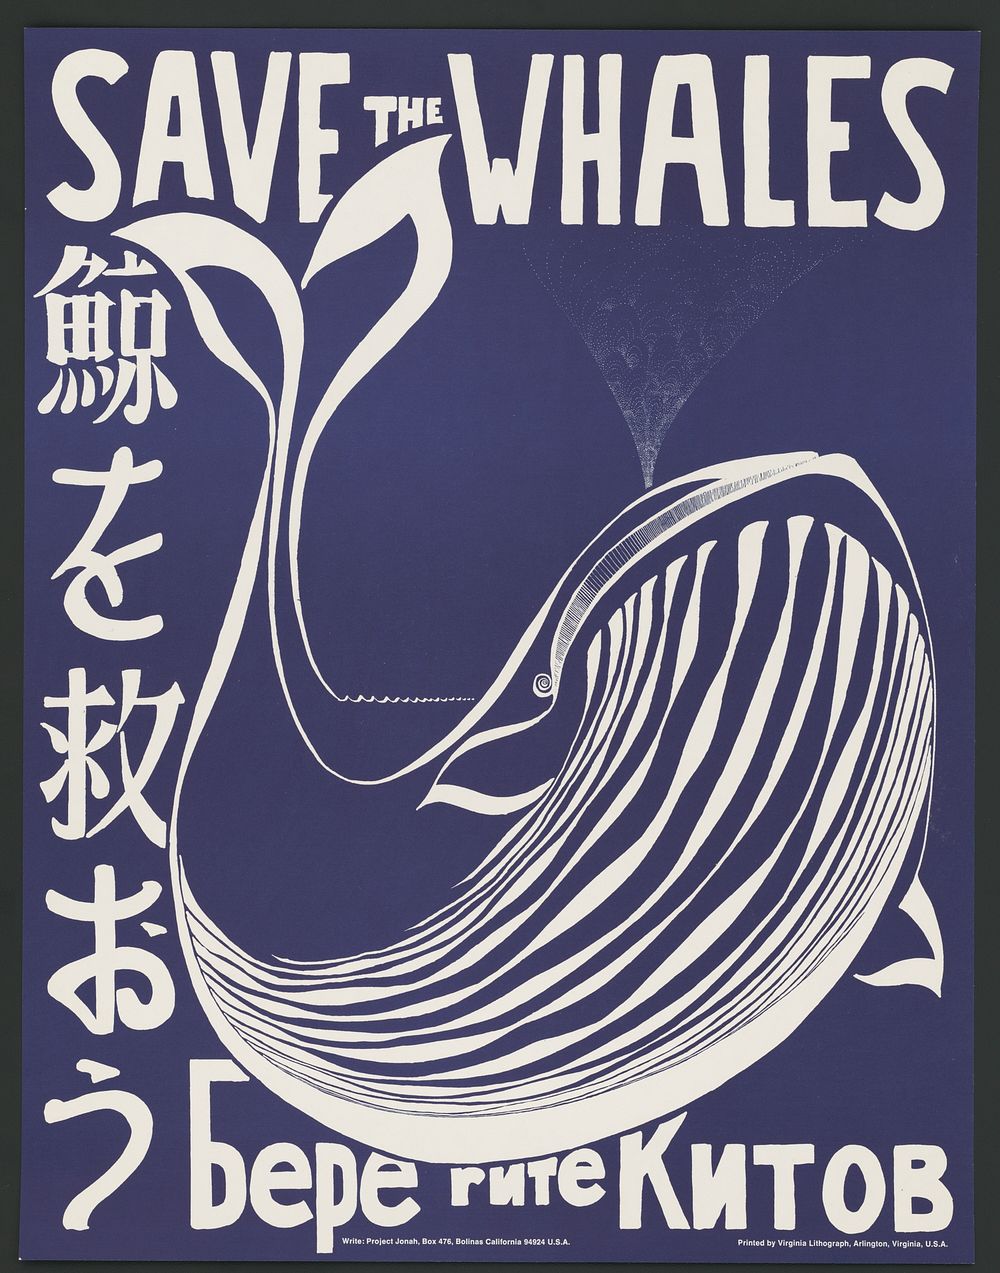 Save the whales.